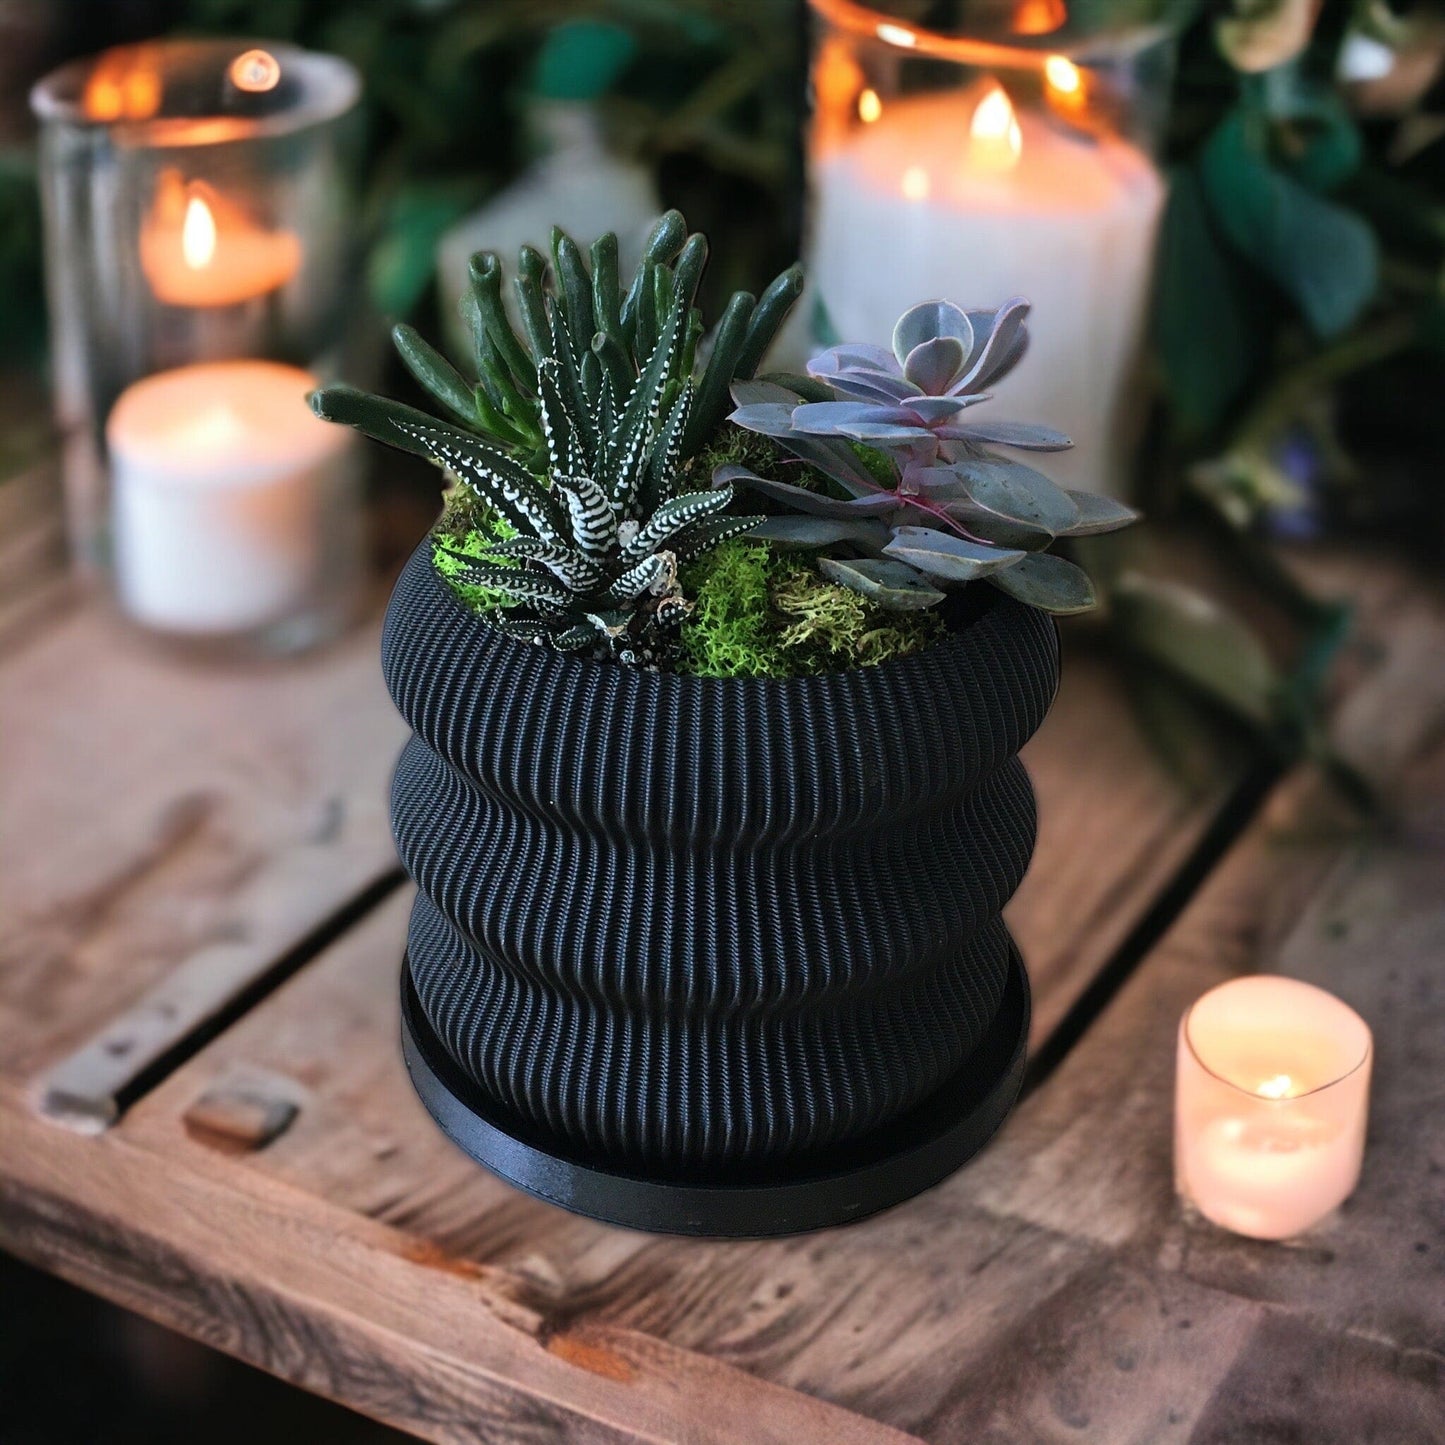 LOCALLY GROWN SUCCULENTS IN BLACK 3D PRINTED ECO POT - 5" x 7"